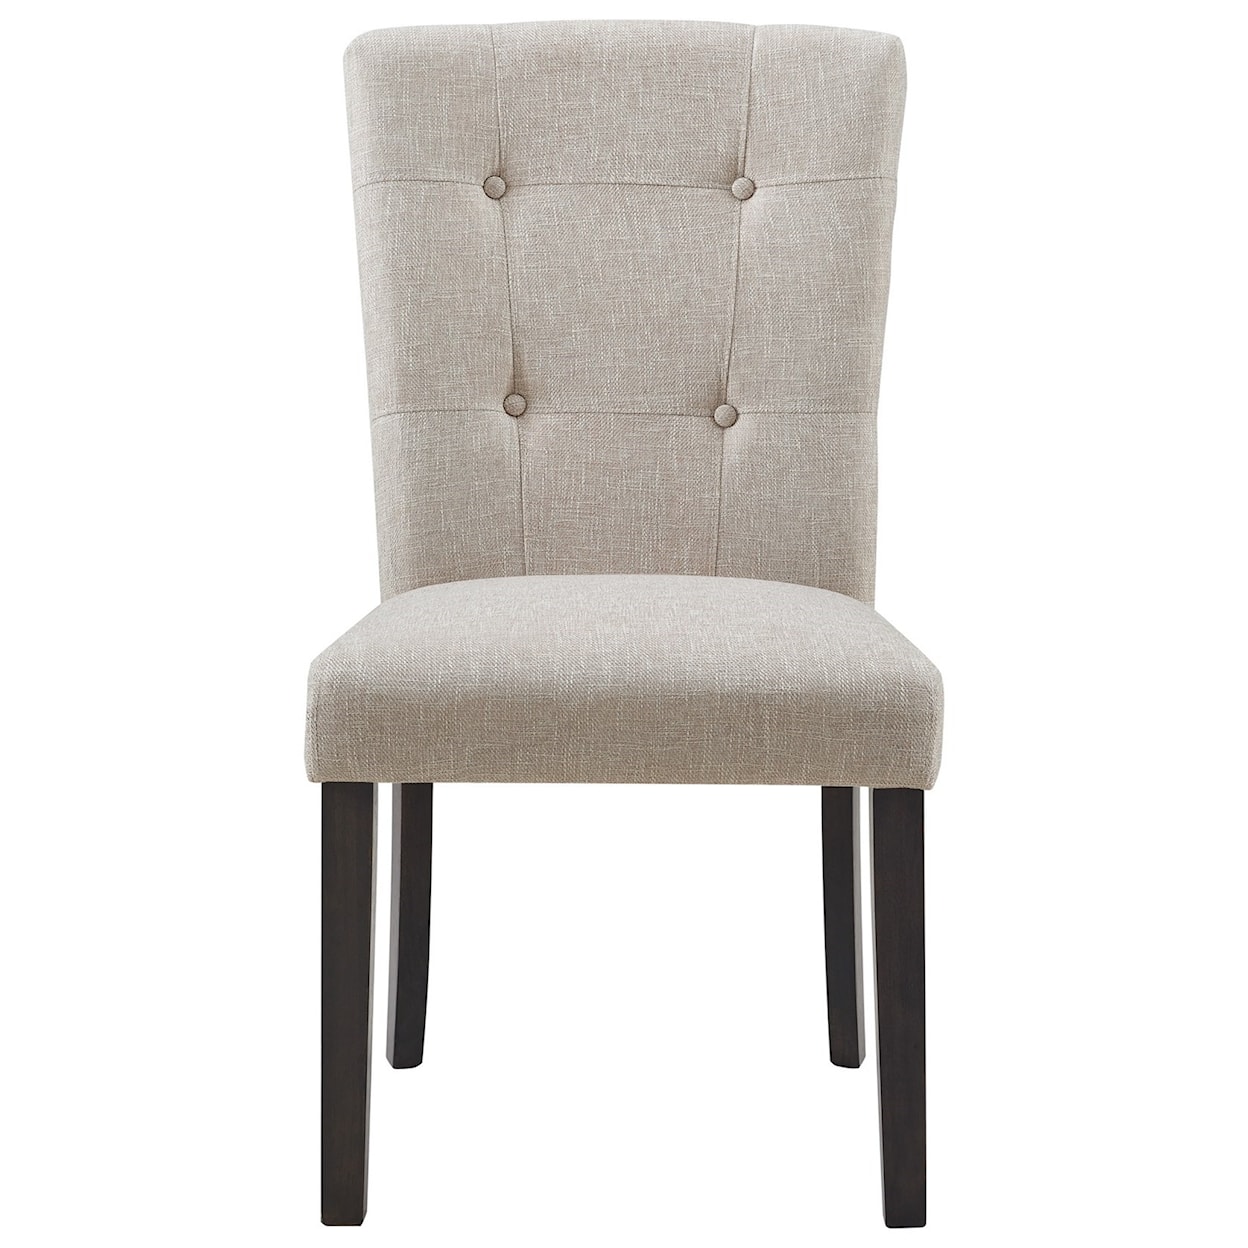 Elements International Lexi Tufted Upholstered Chair